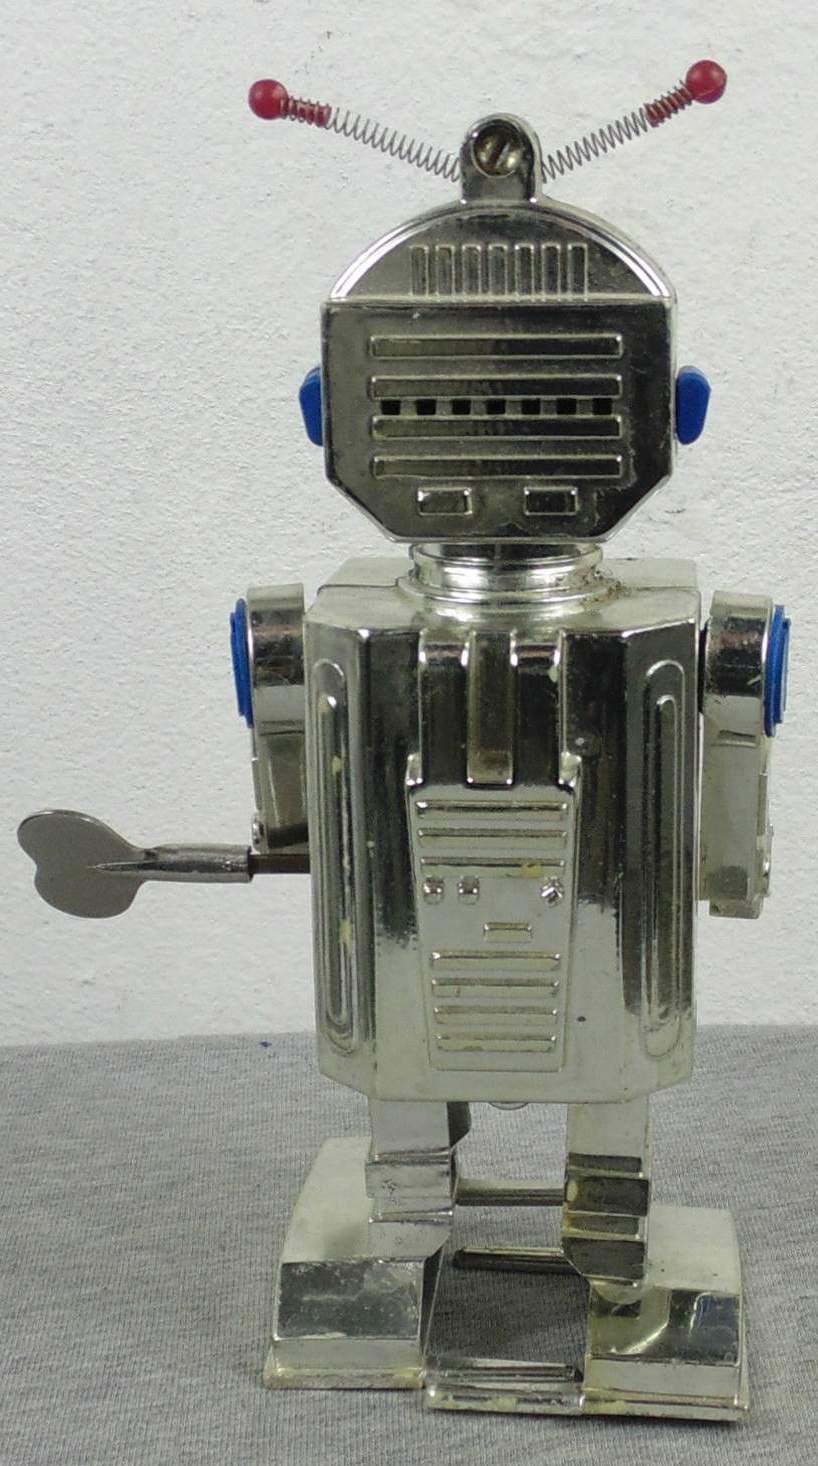 Russian Windup Space Robot Toy by Clockwork - The Old Robots Web Site